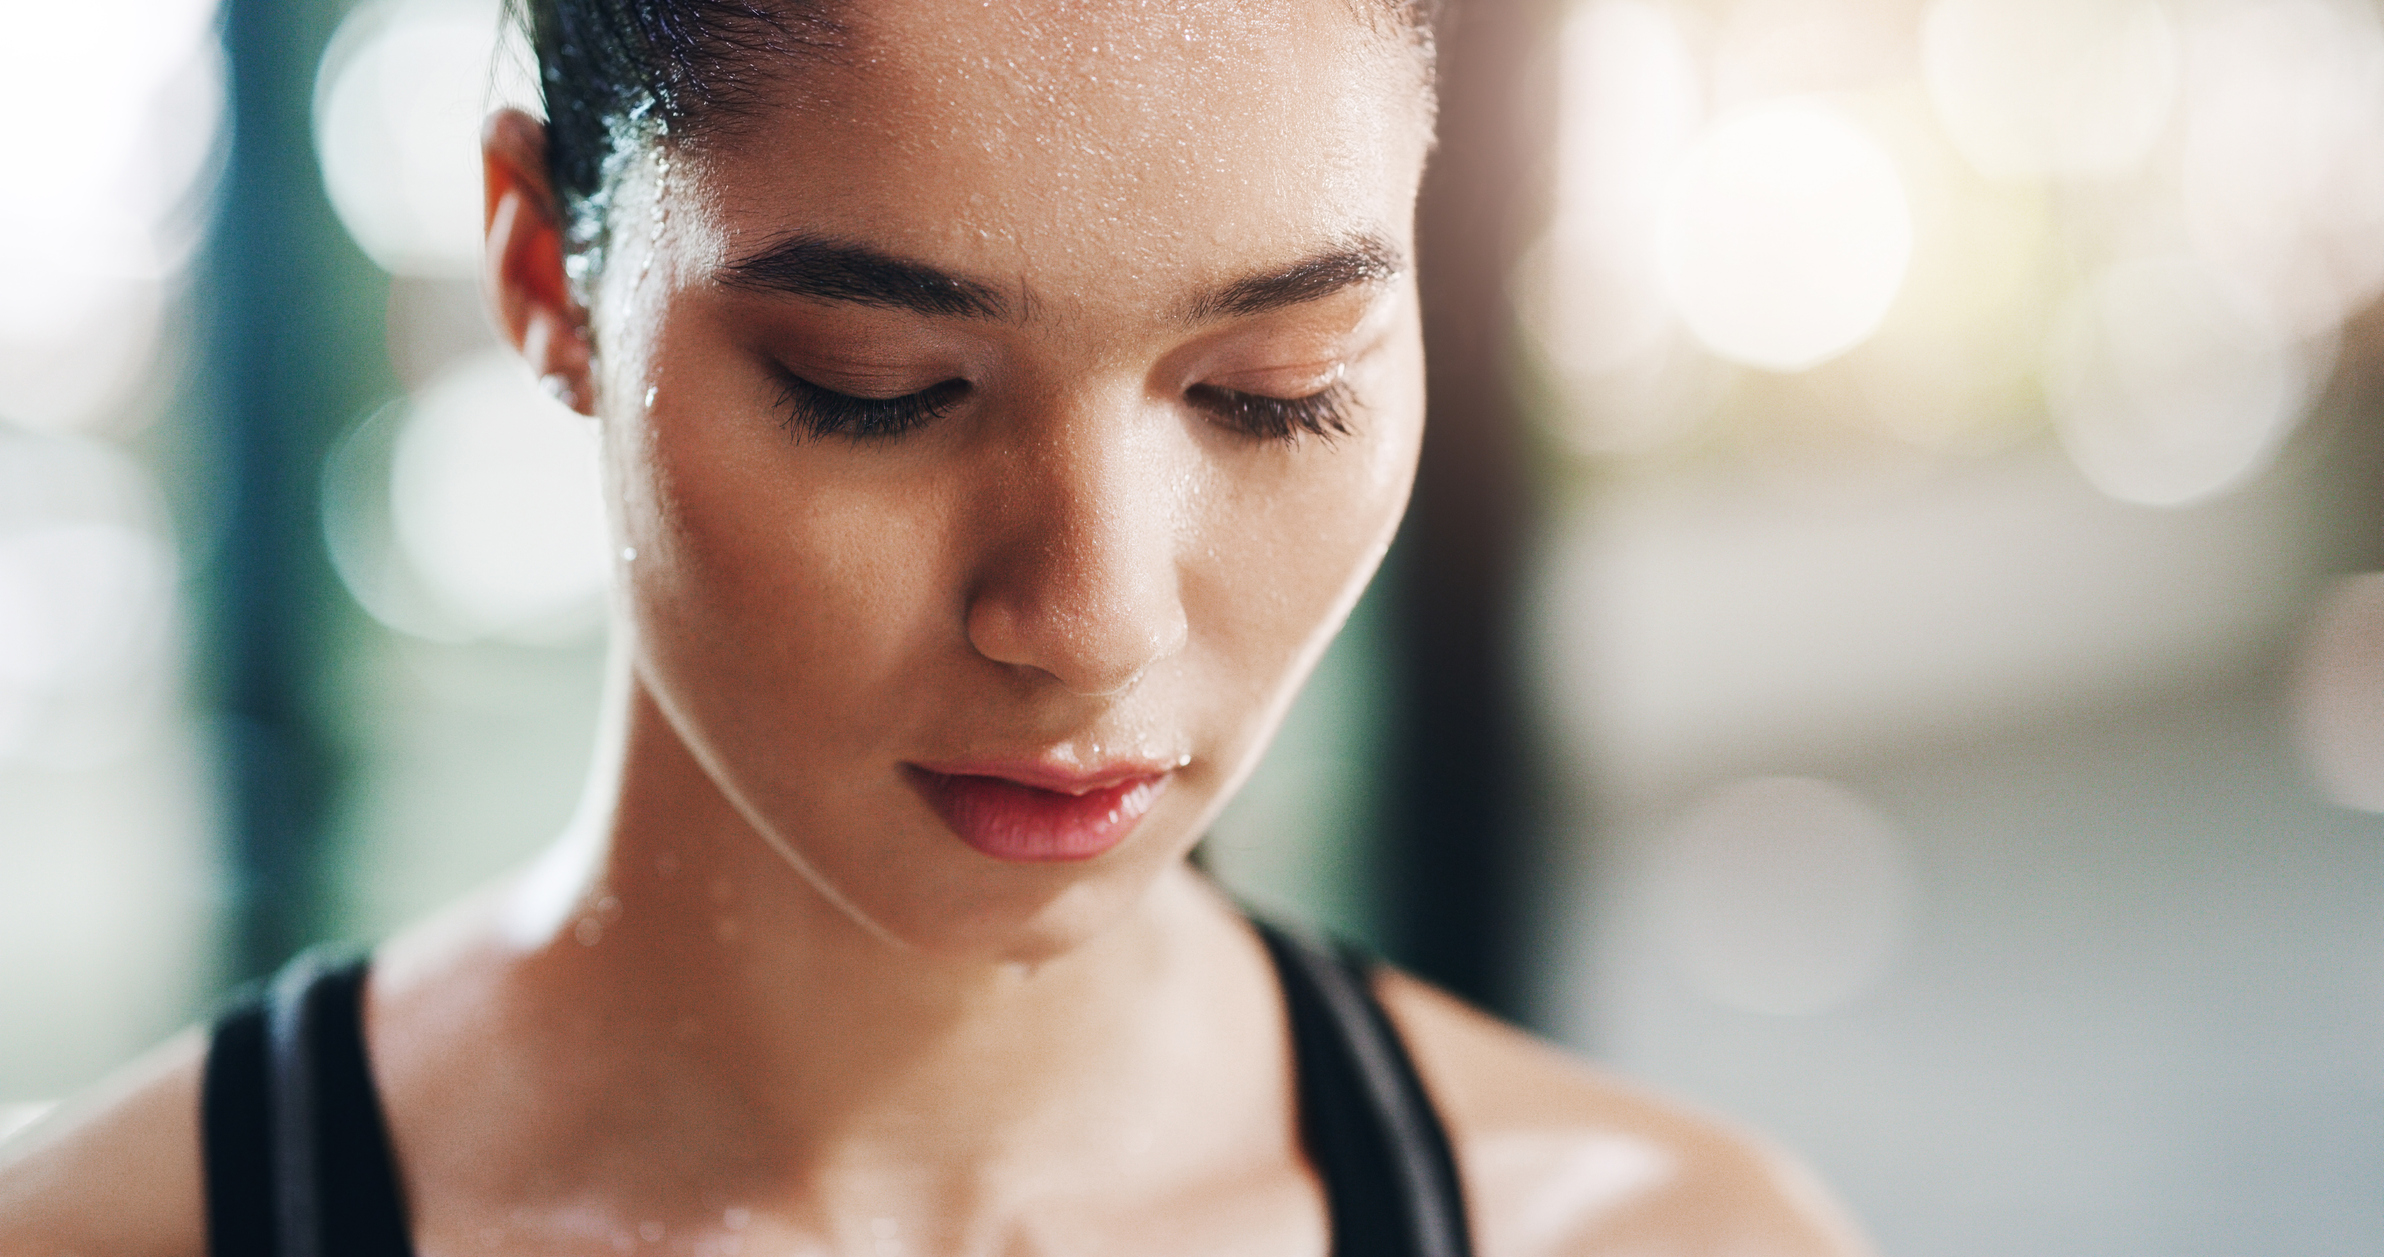 Closeup shot of a young female dancer looking hot, sweaty and tired with her eyes closed.